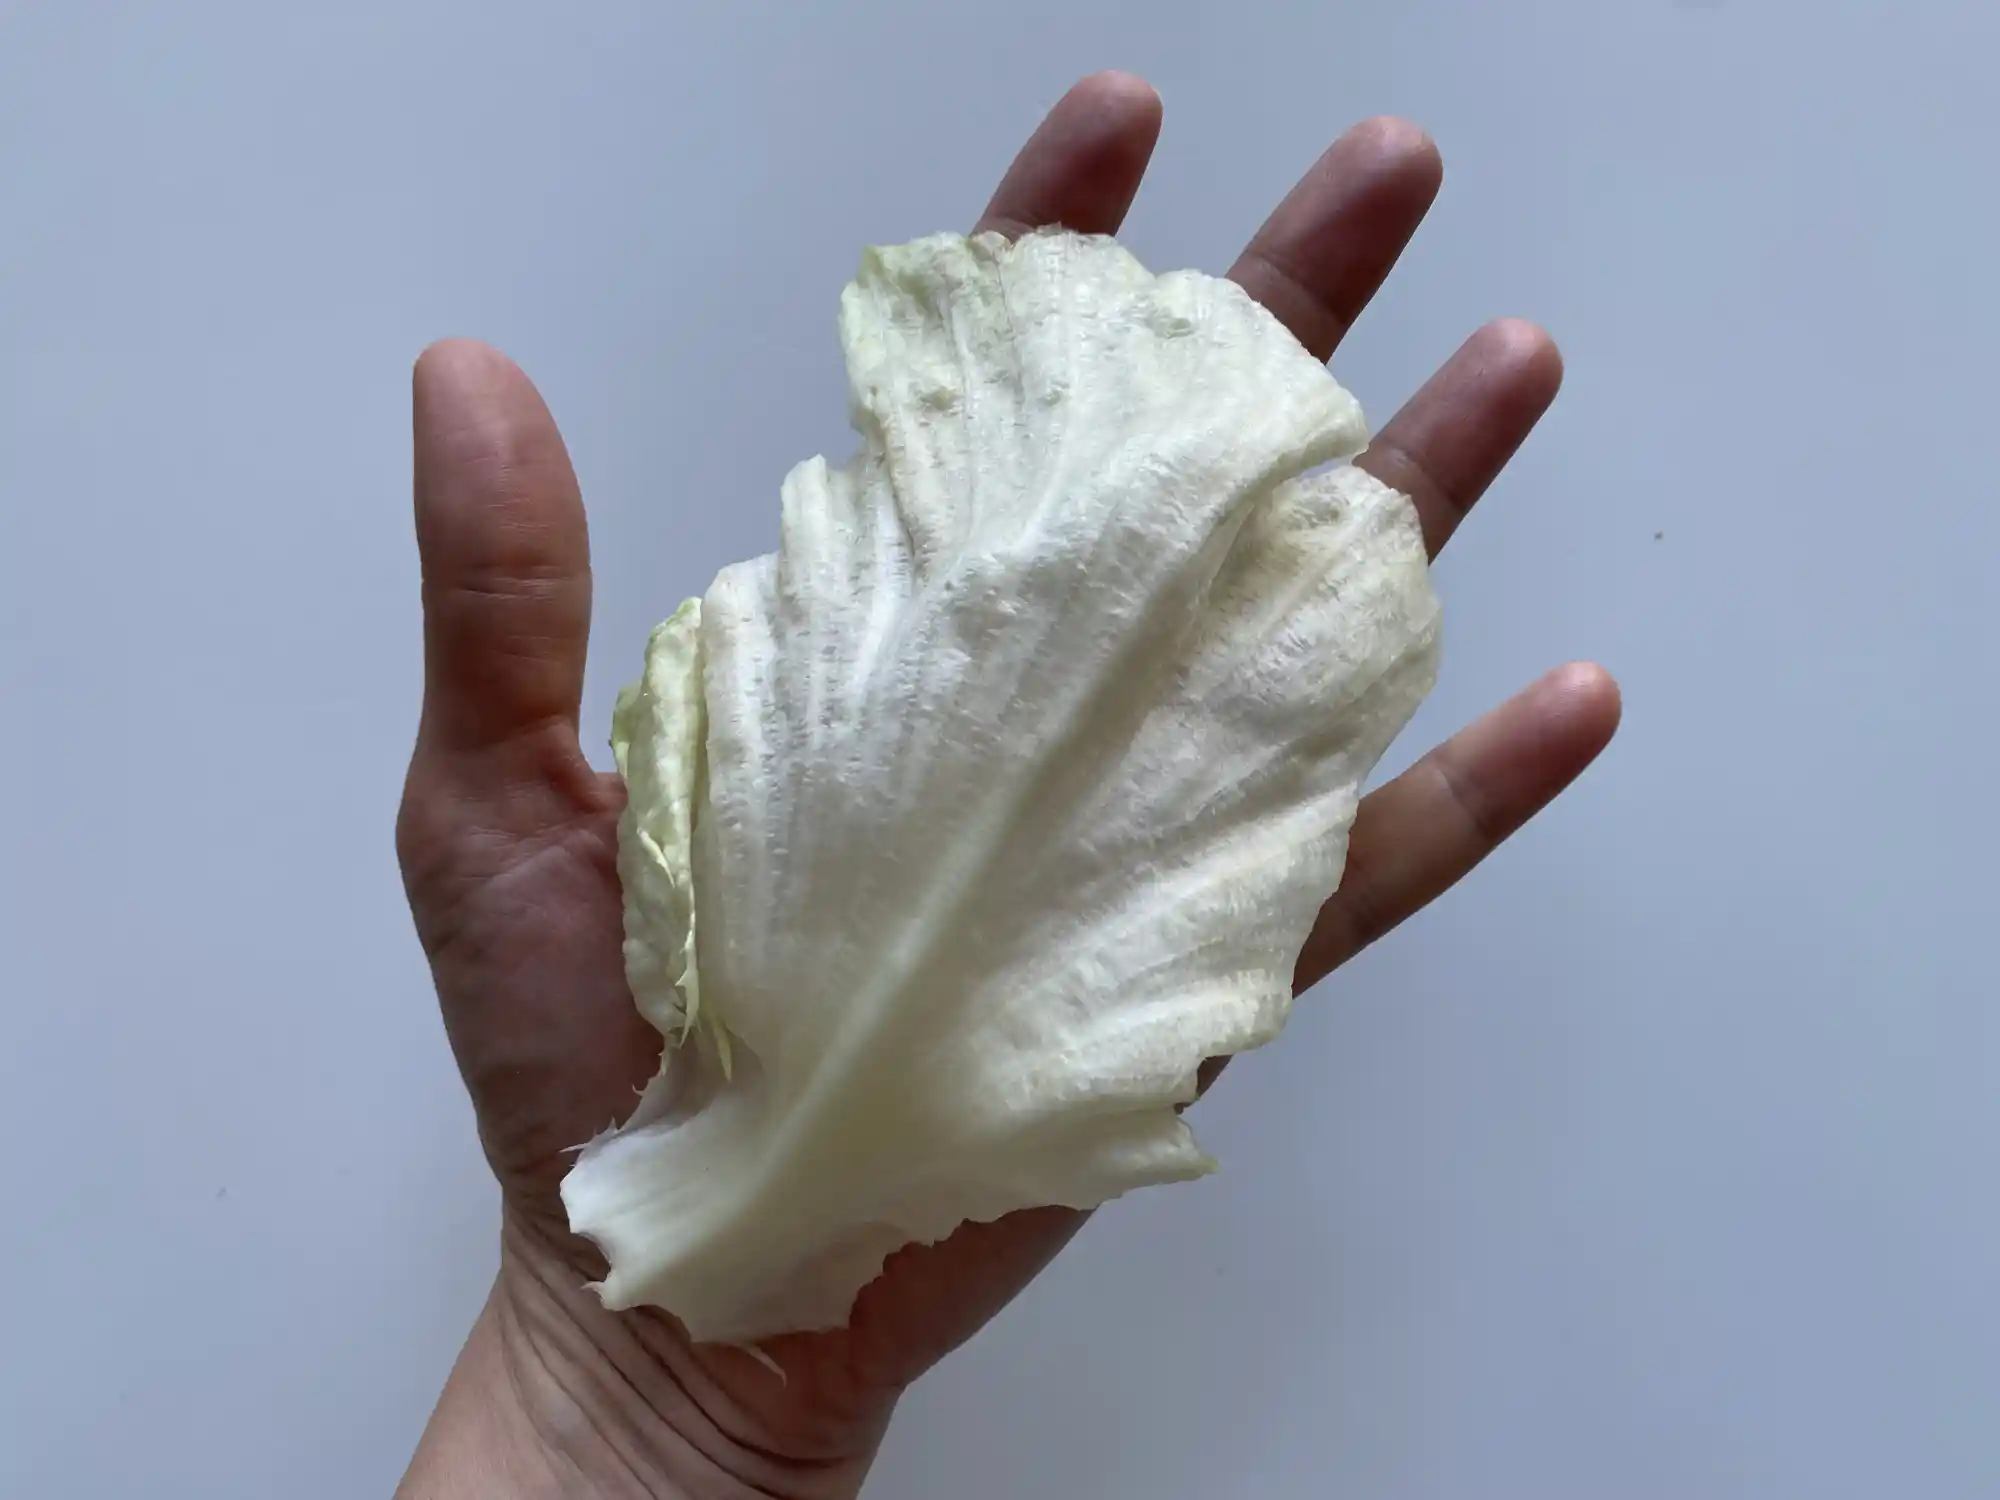 a hand holding a large rib of iceberg lettuce with most of the floppy part torn off